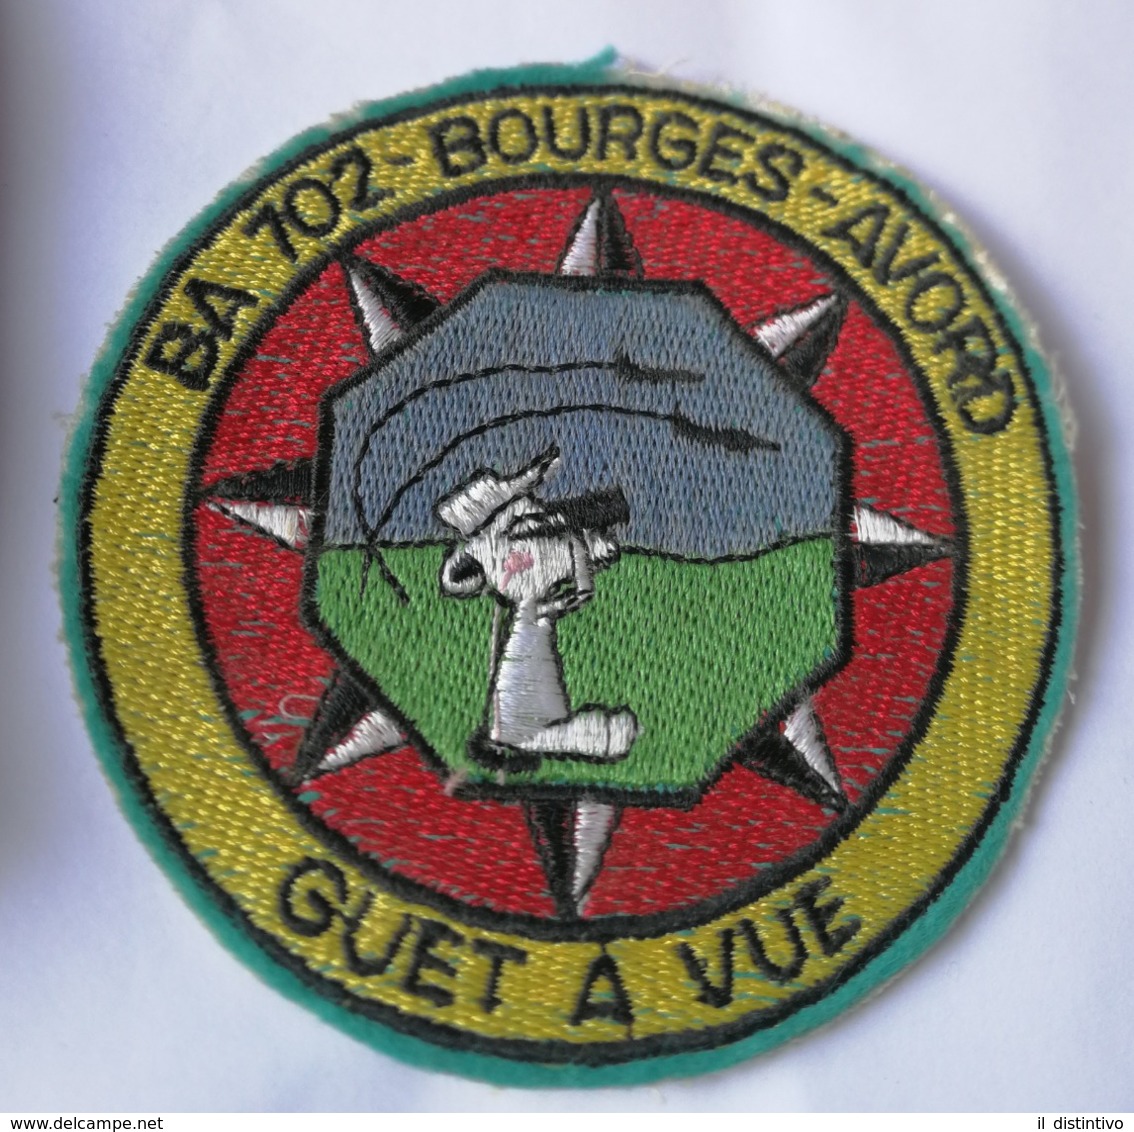 BELLISSIMA TOPPA USATA BA 702 BOURGES - AVORD AIR BASE GUET A VUE FRANCESE PATCH - Scudetti In Tela